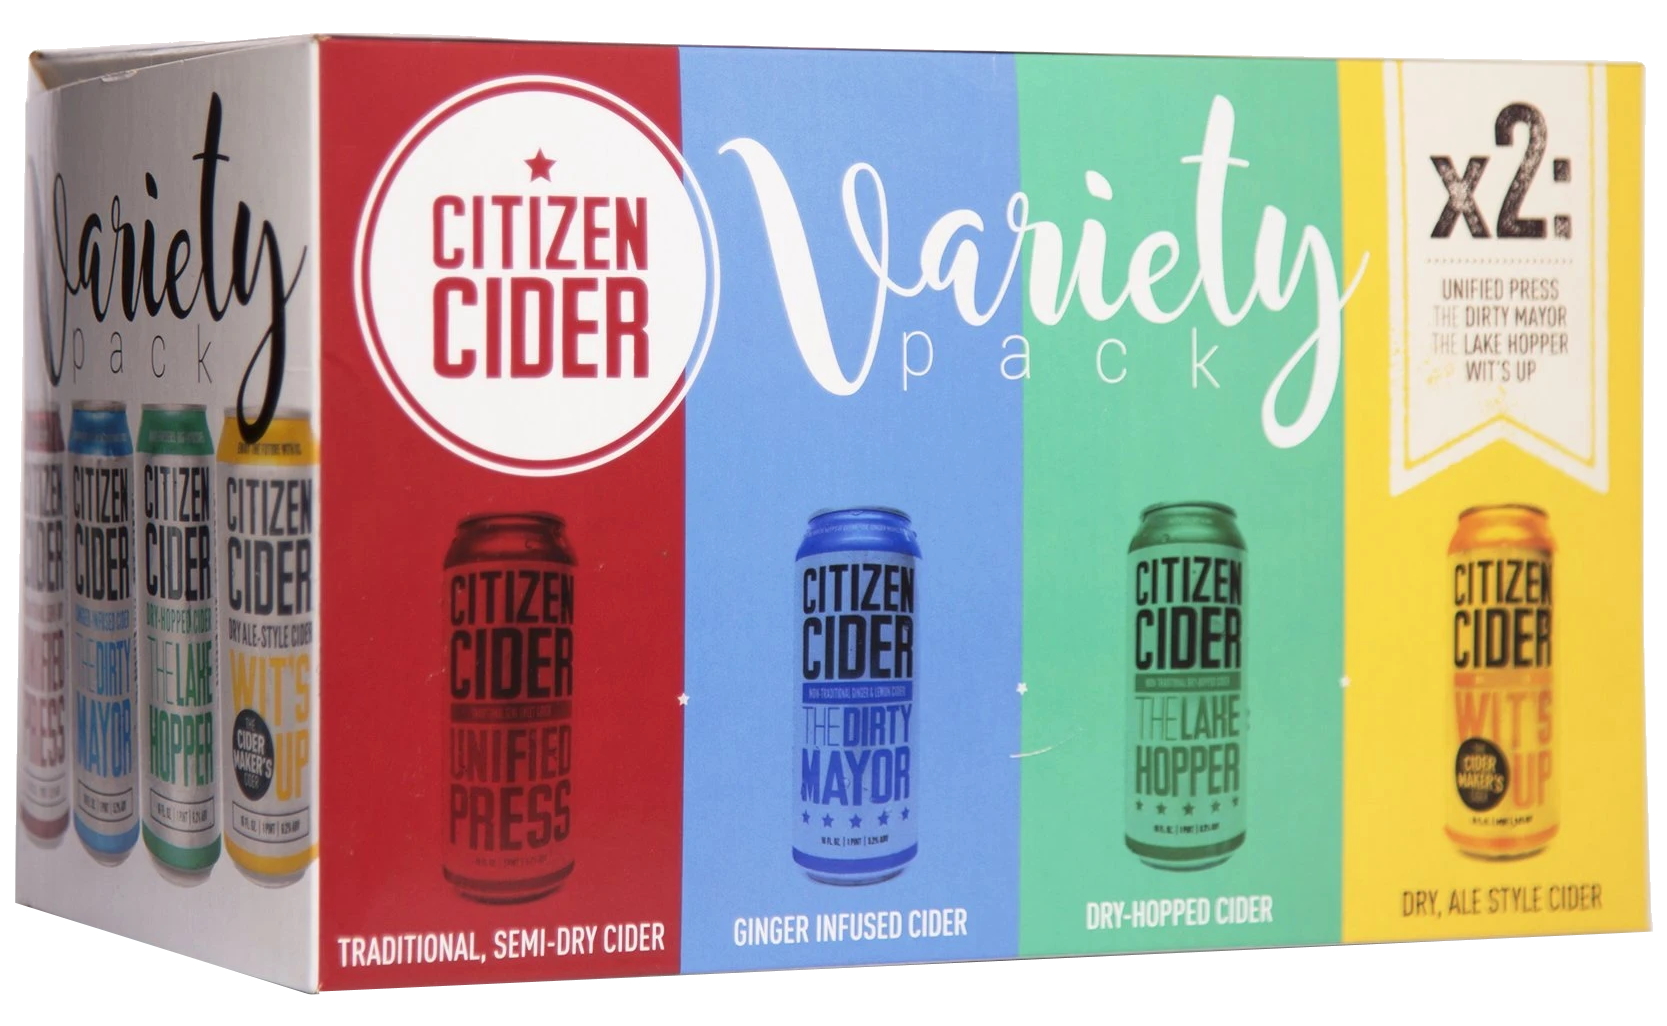 Citizen Cider Lake Hopper Variety 8-Pack Including: Unified Press, The  Dirty Mayor, The Lake Hopper and Wit's Up 16 oz - BottleBuys